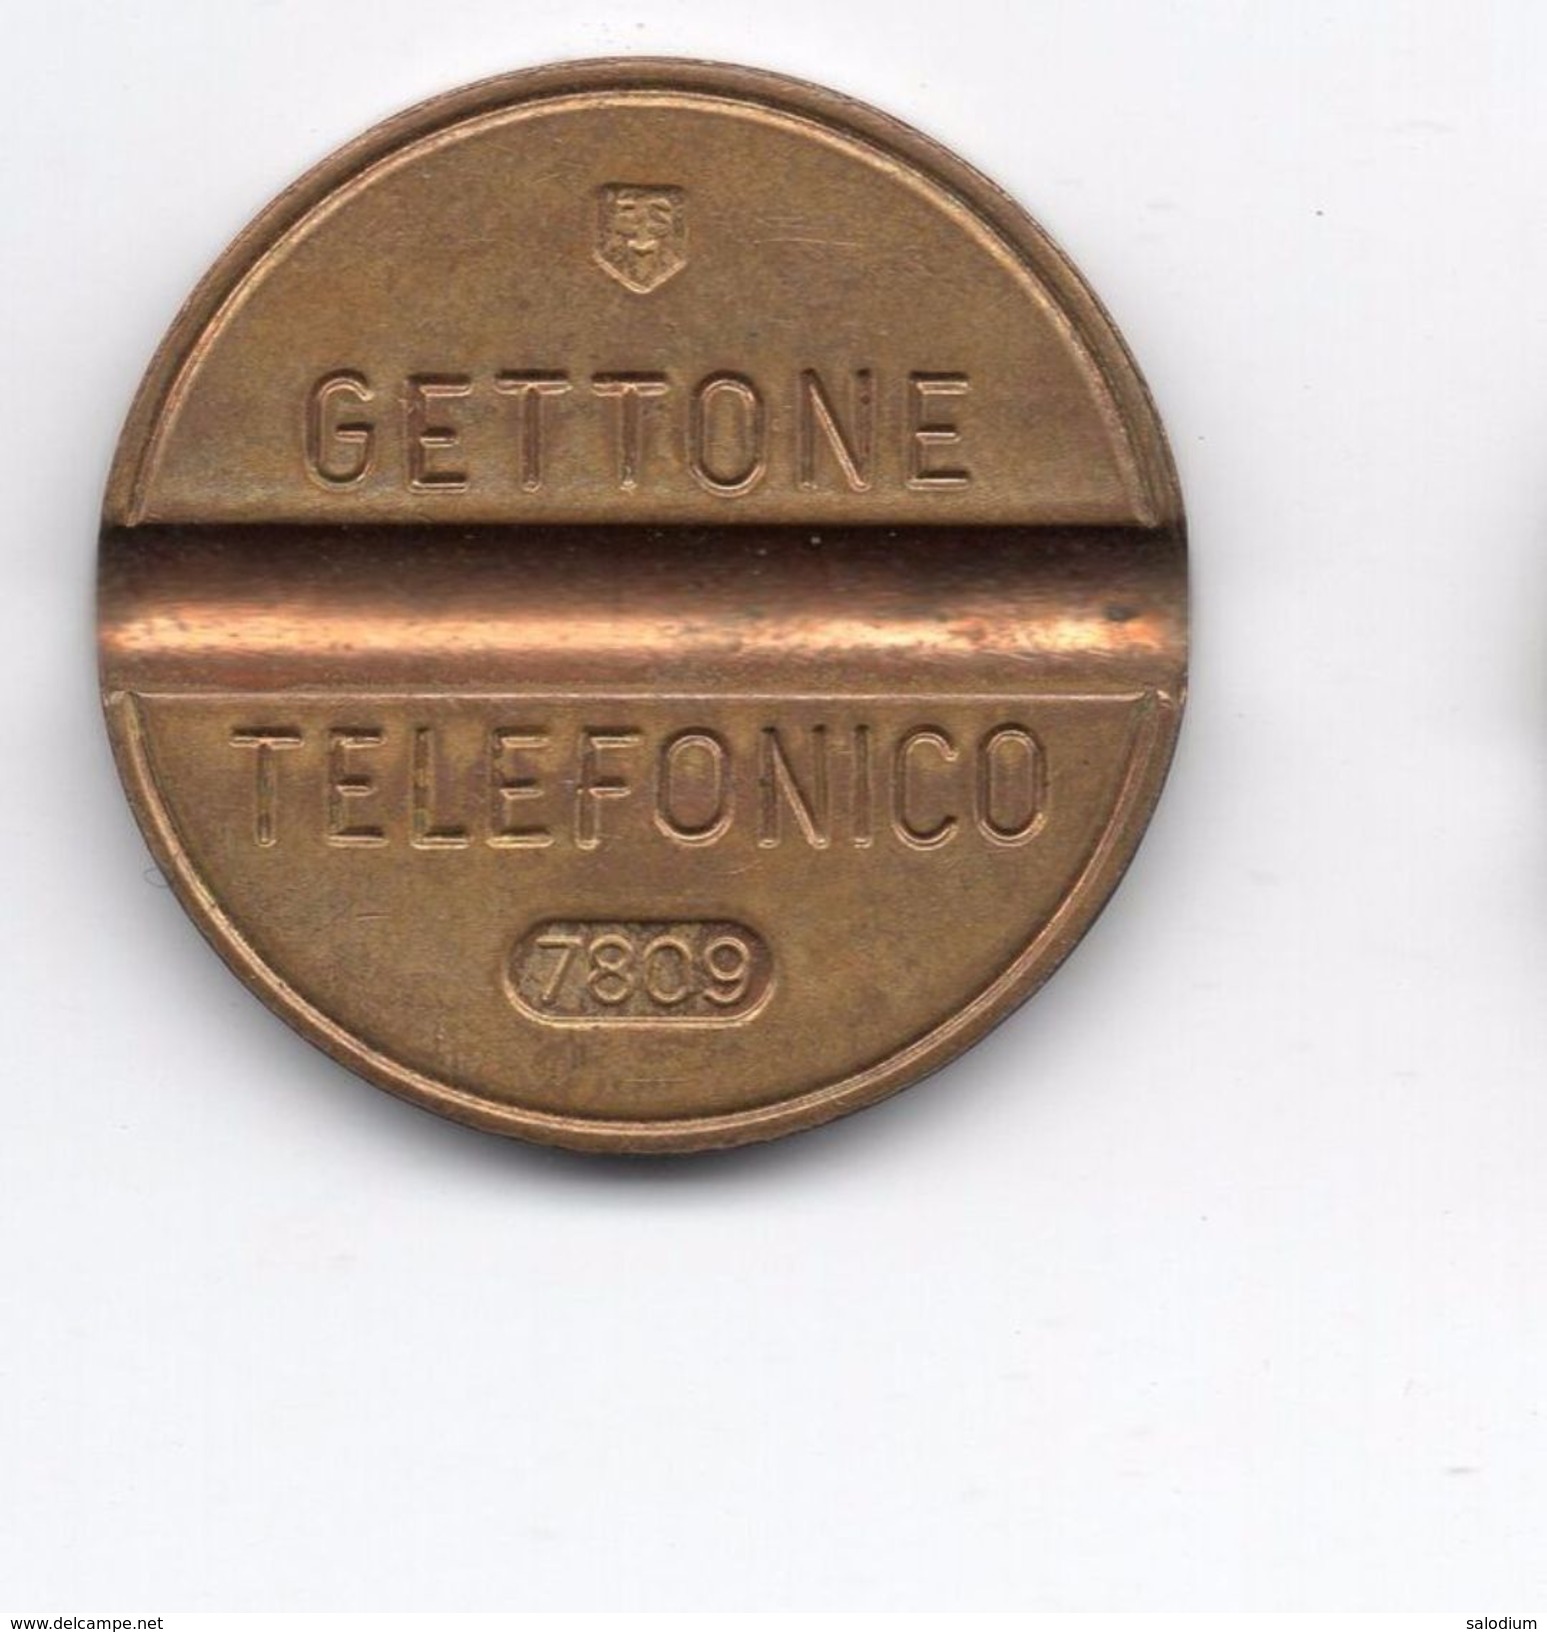 Gettone Telefonico 7809 Token Telephone - (Id-649) - Professionals/Firms